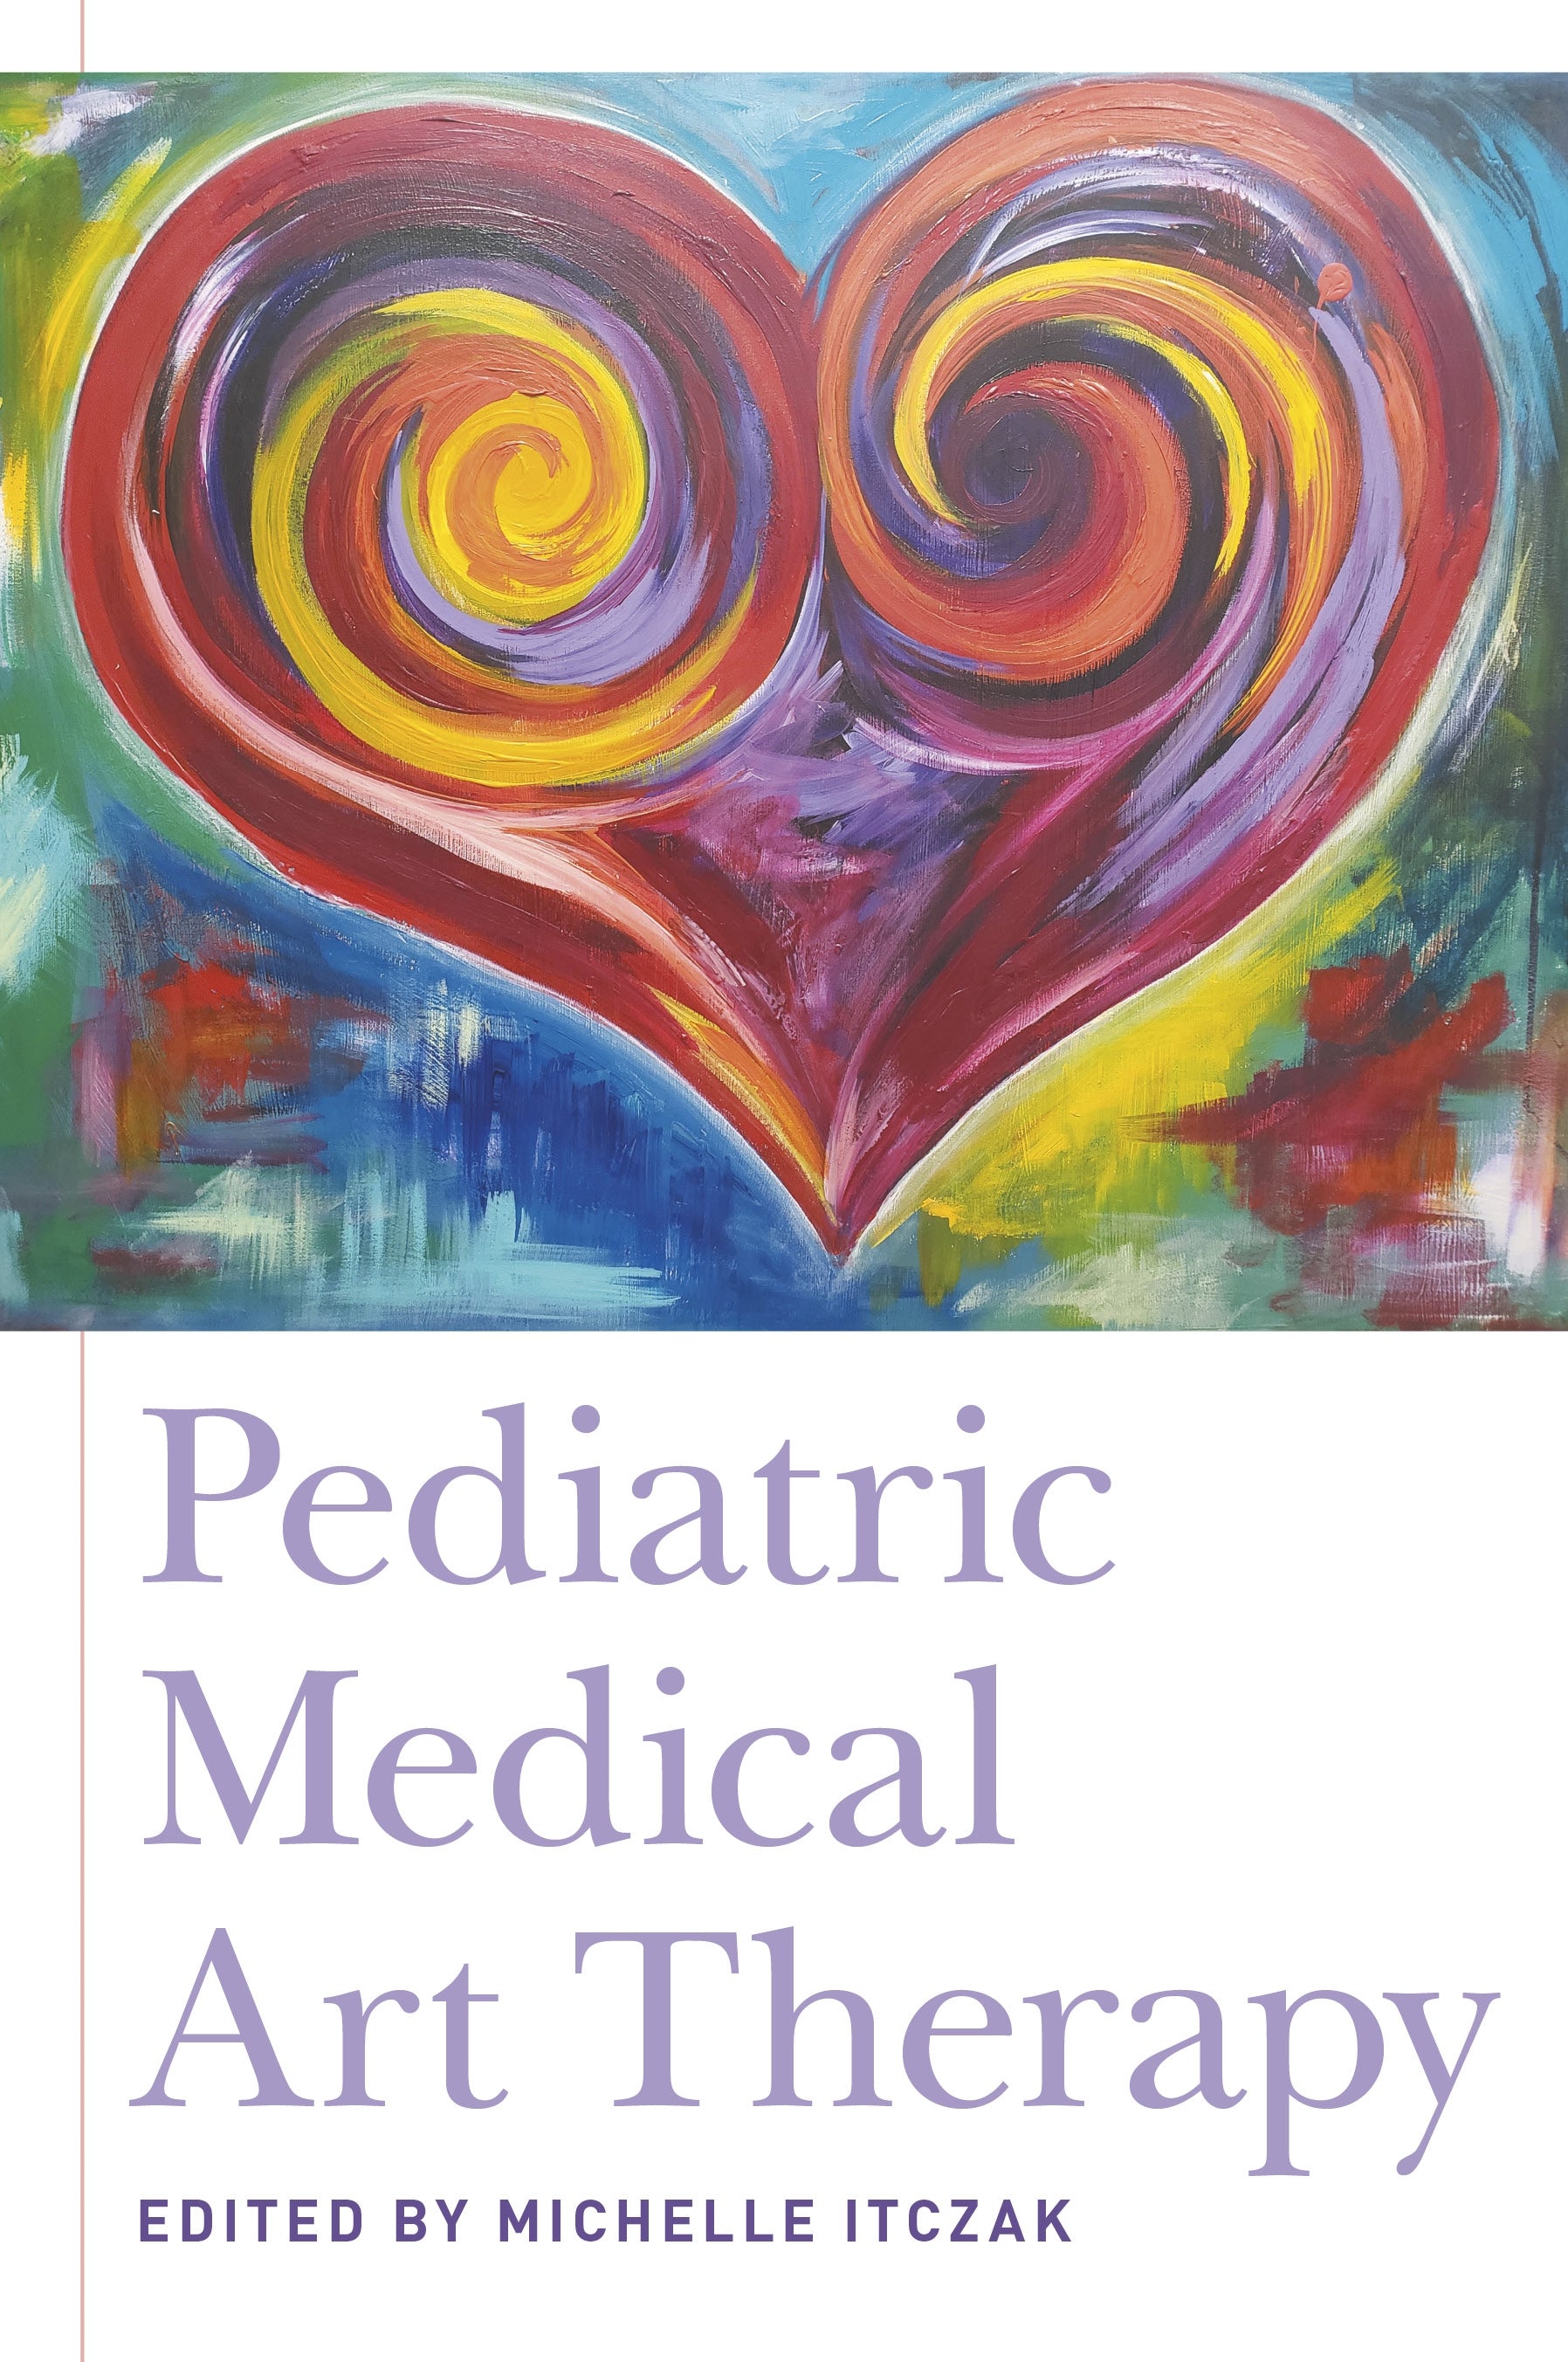 Pediatric Medical Art Therapy by Michelle Itczak, No Author Listed